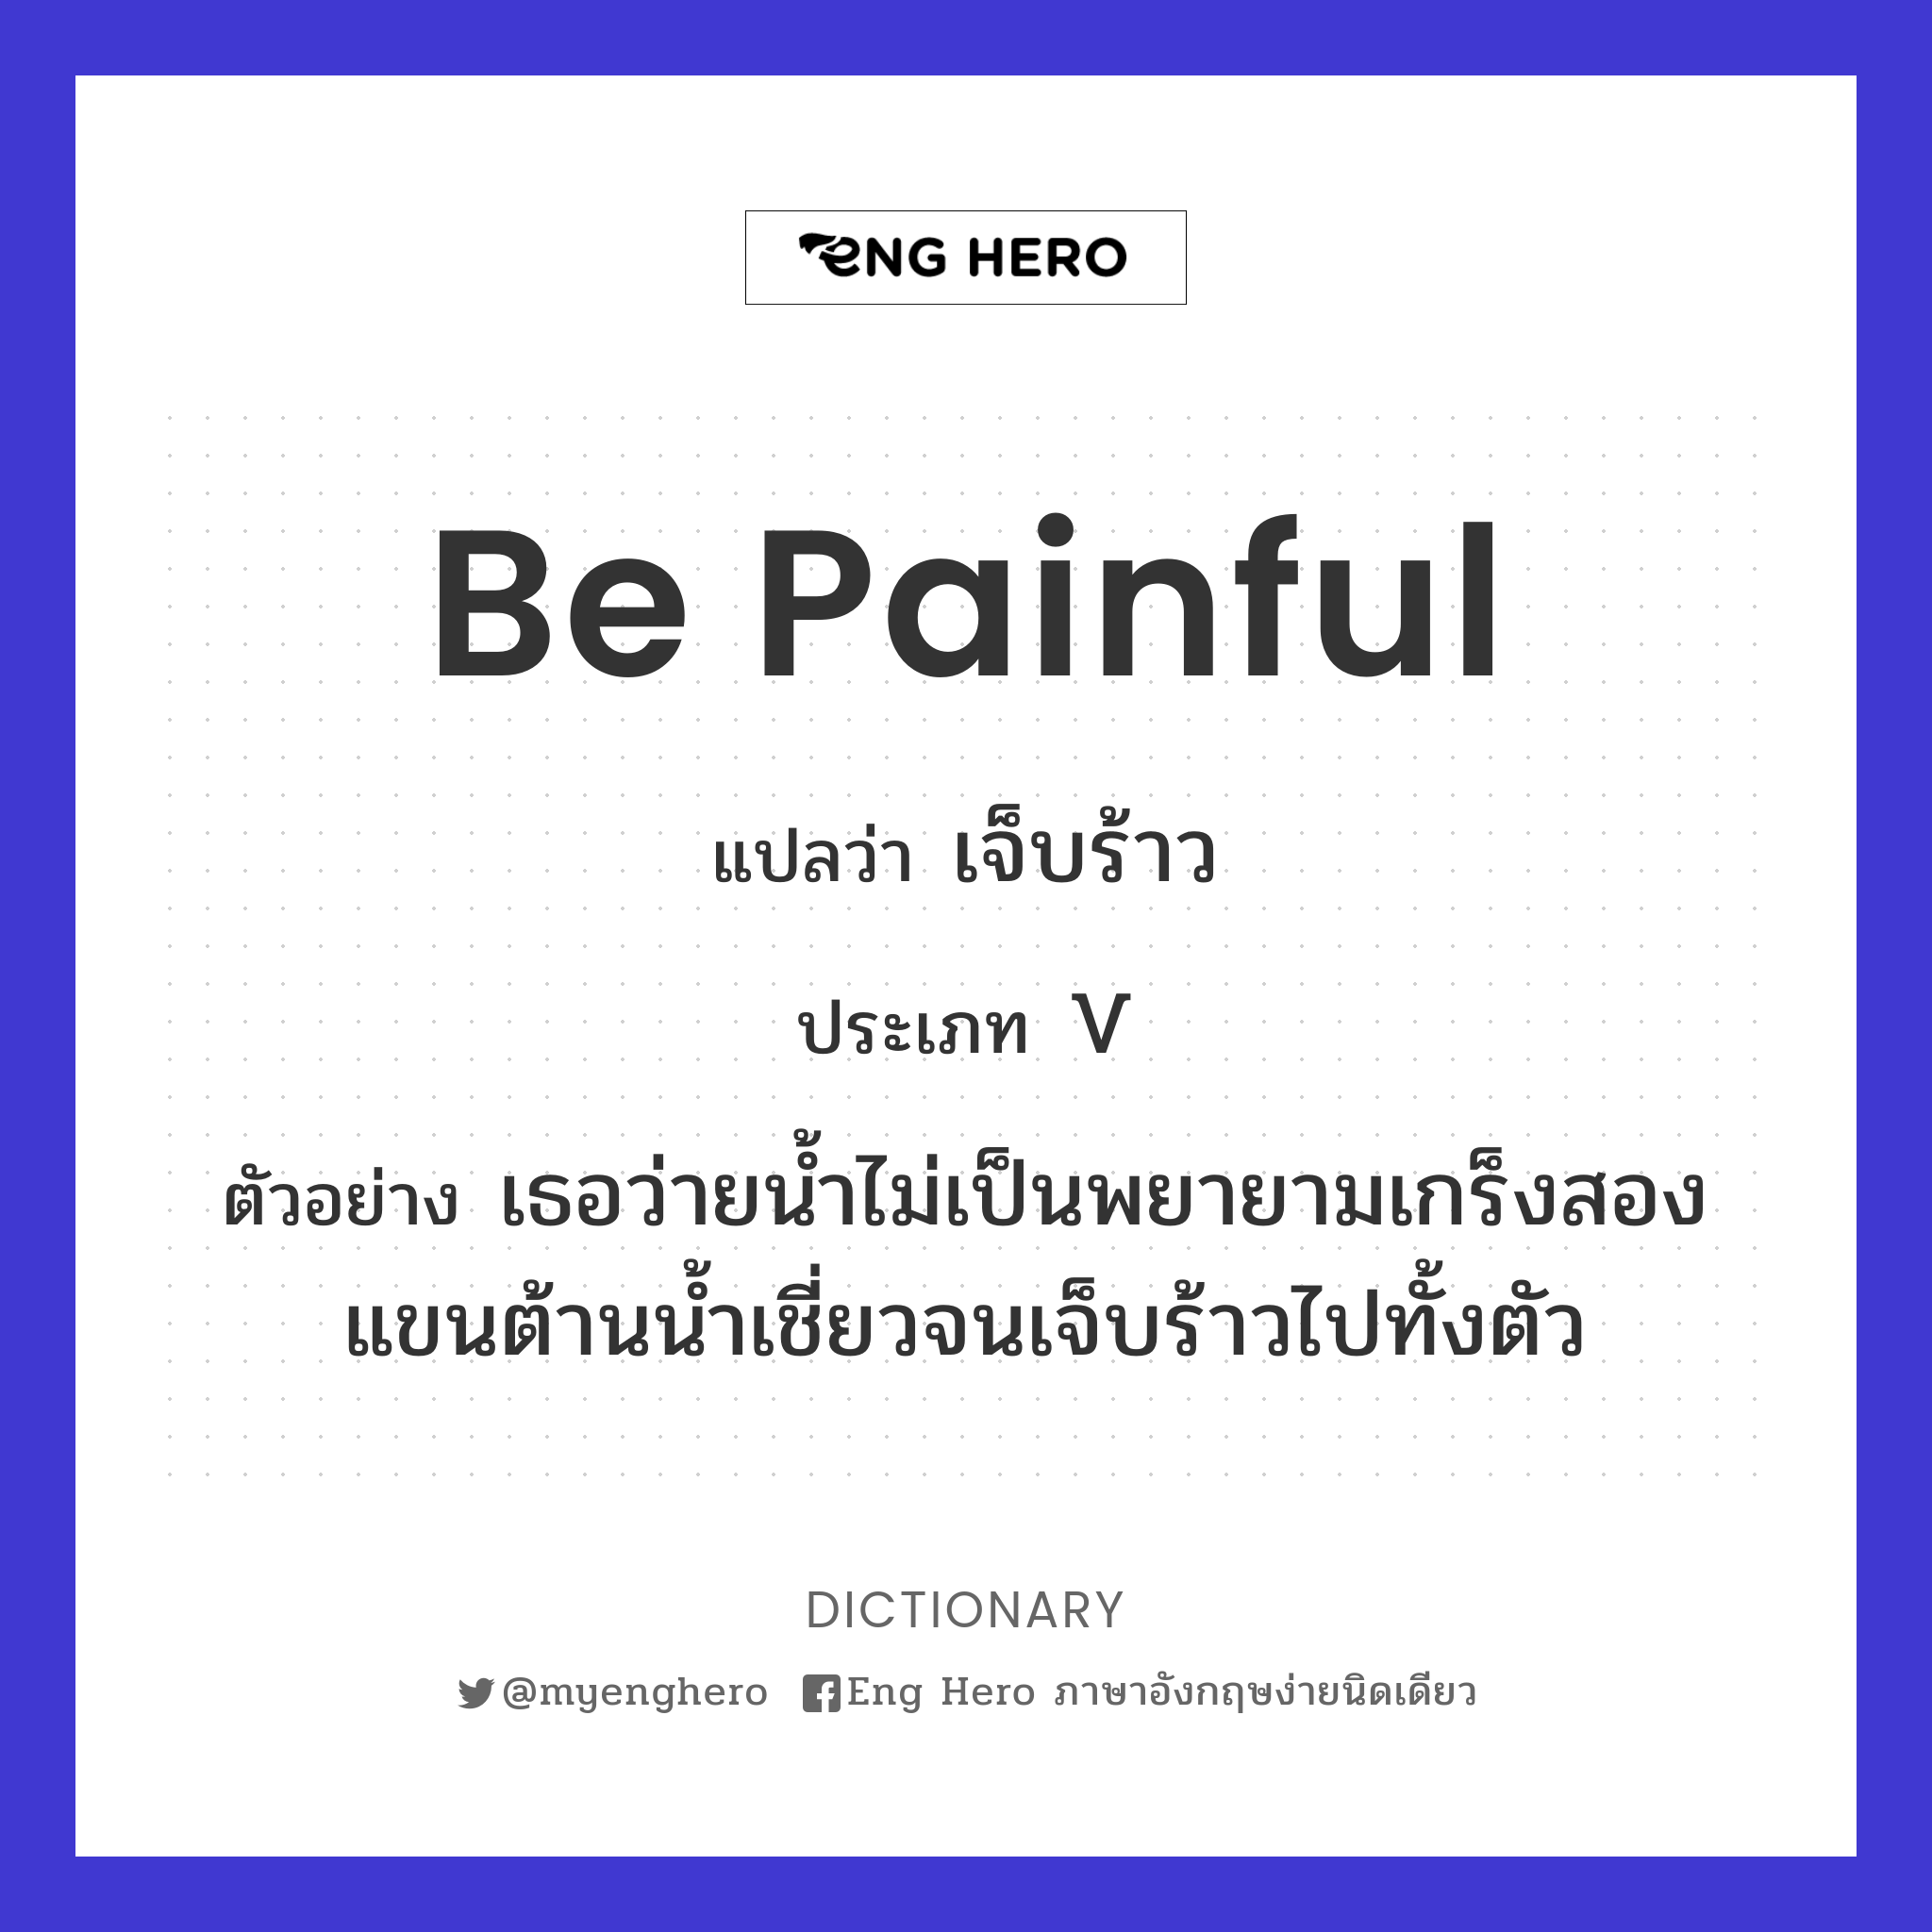 be painful